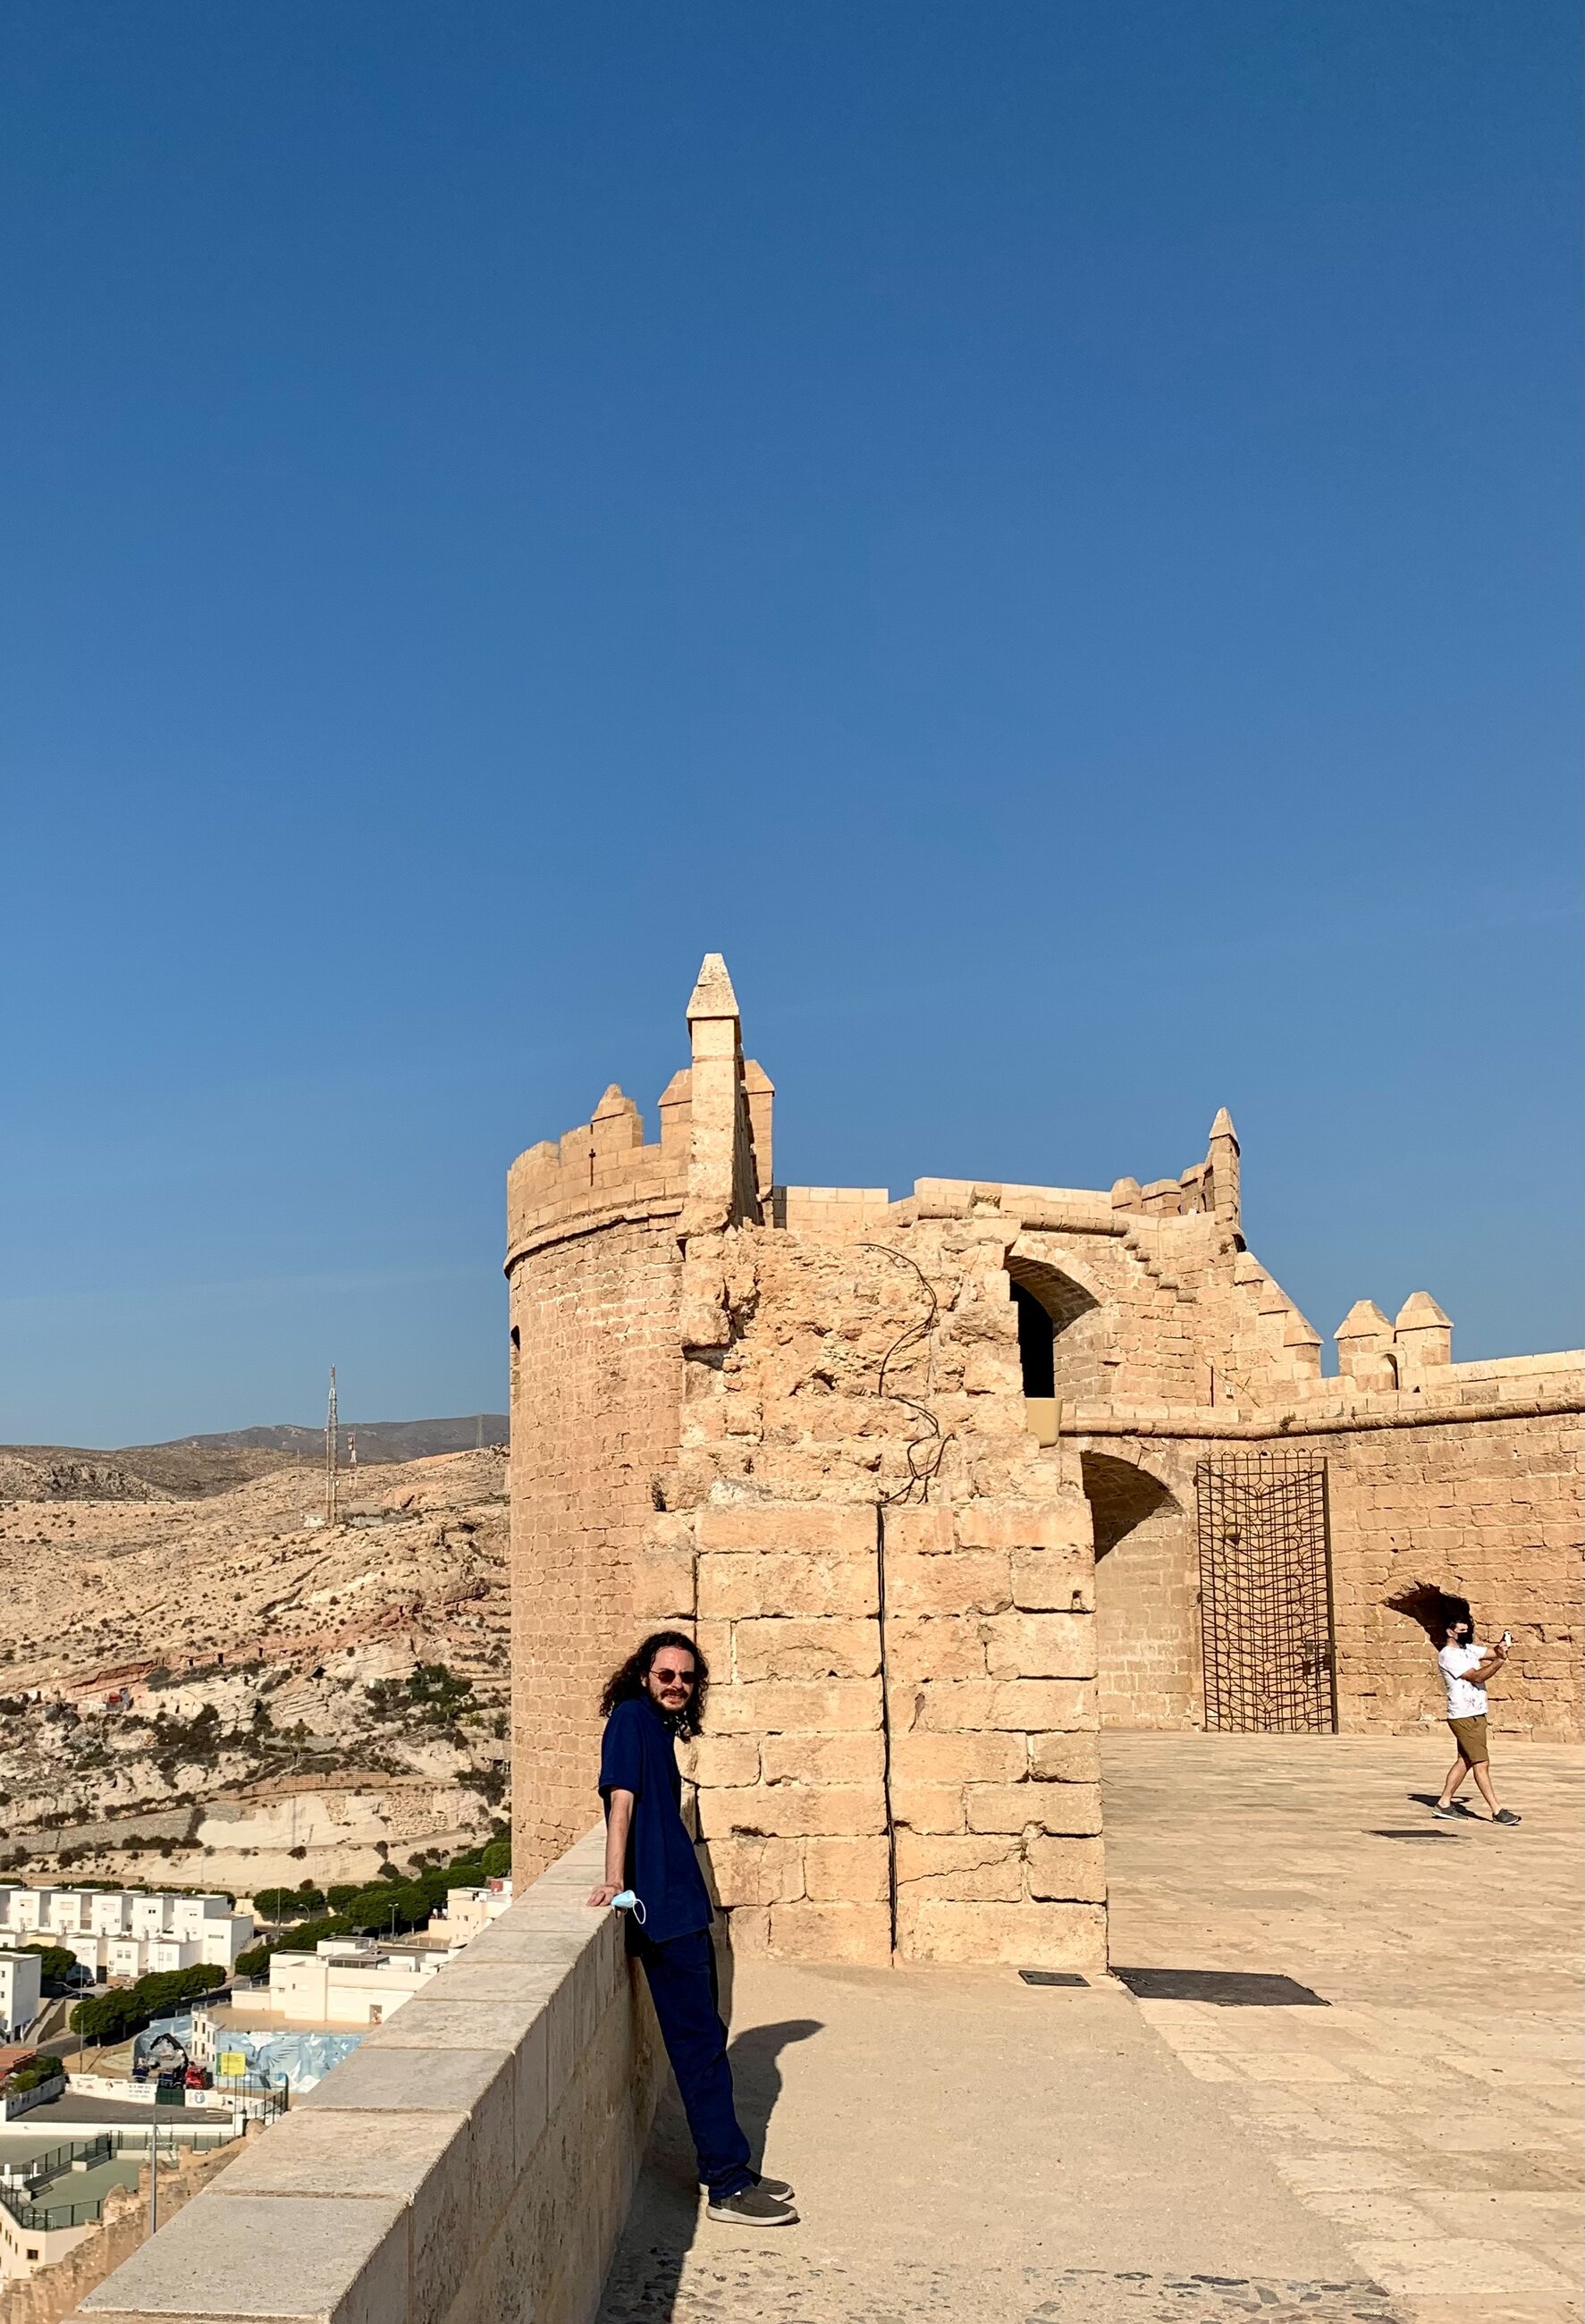 Myself at the famed Alcazaba fortress in the city of Almeria, Andalucía, Spain.